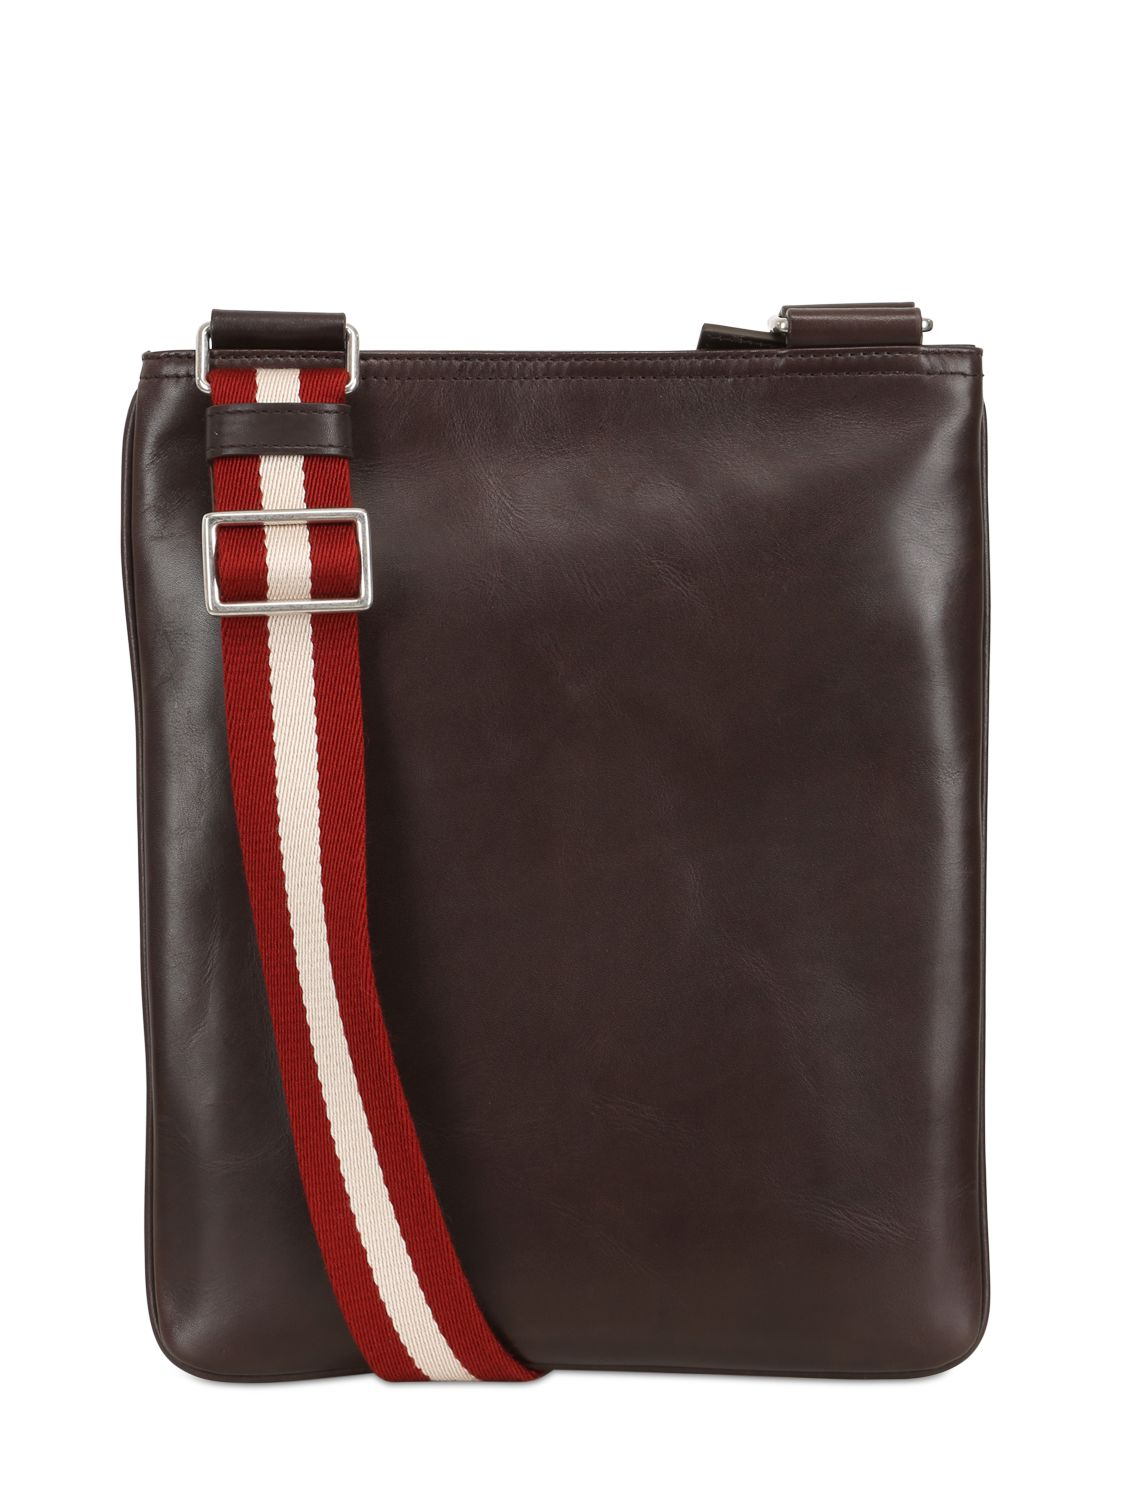 Bally Leather Crossbody Bag in Brown for Men